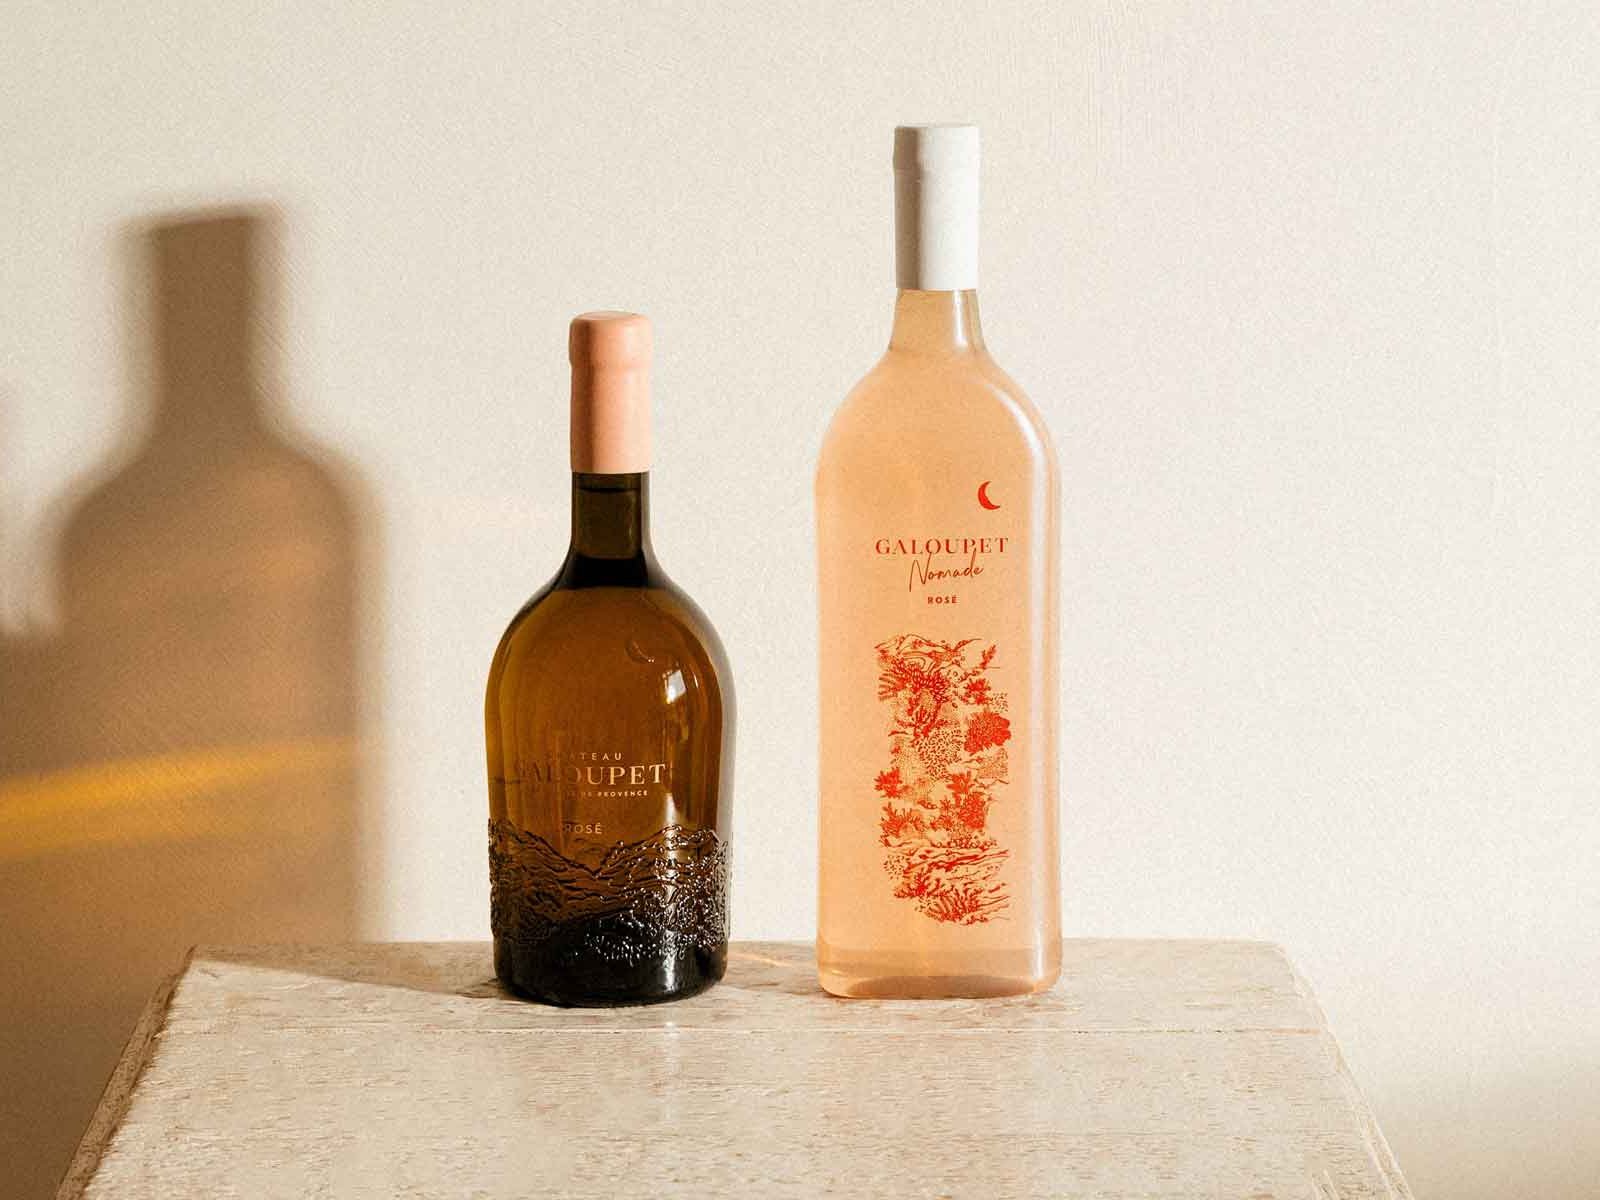 Château Galoupet: A More Sustainable Way To Enjoy Rosé